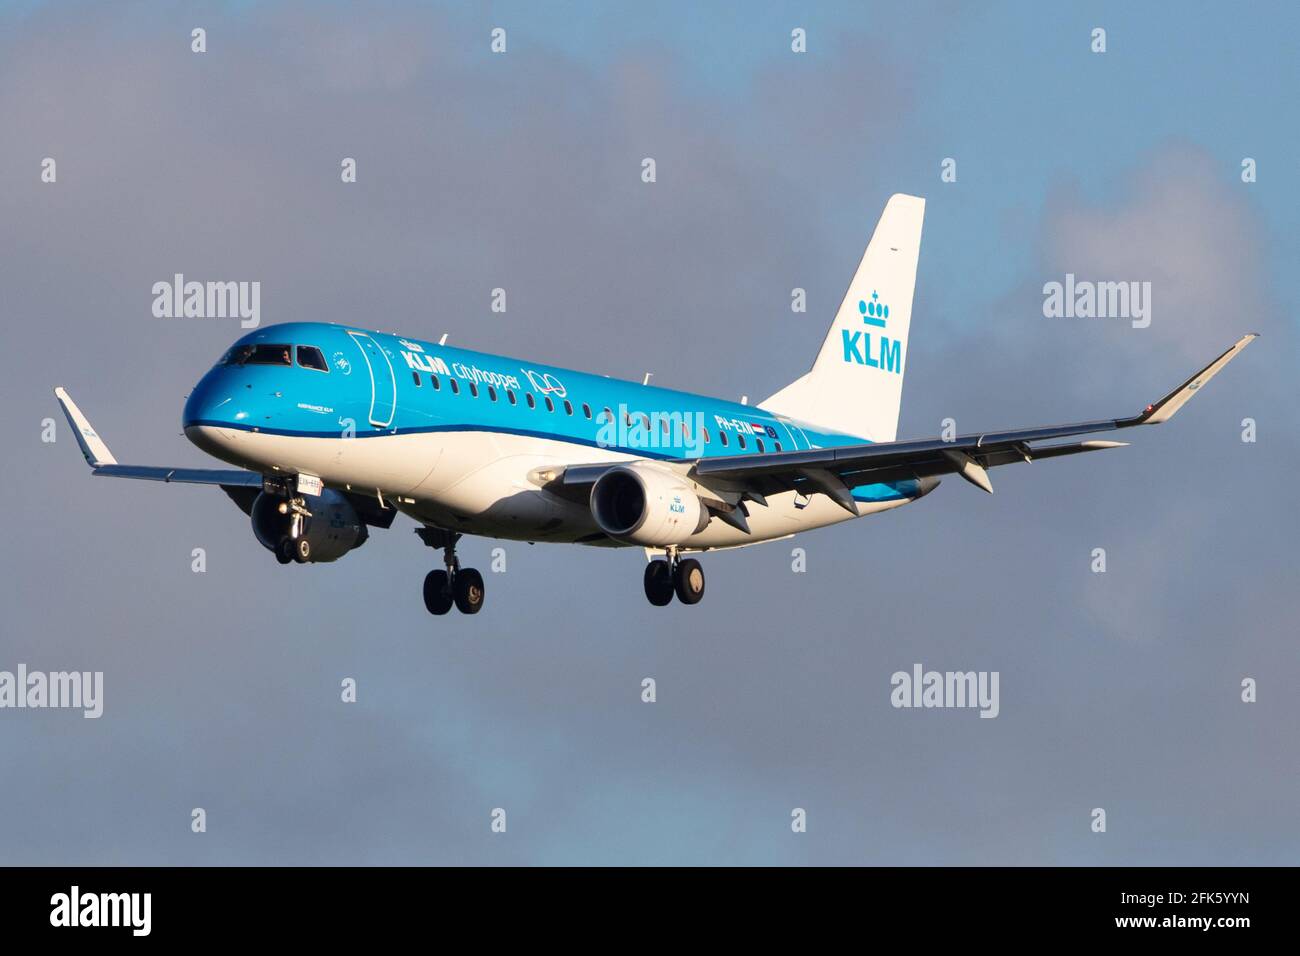 AMSTERDAM, NETHERLANDS - Sep 12, 2020: KLM (KL / KLM) approaching Amsterdam Schiphol Airport (EHAM/AMS) with an Embraer E75L (PH-EXN/17000659). Stock Photo